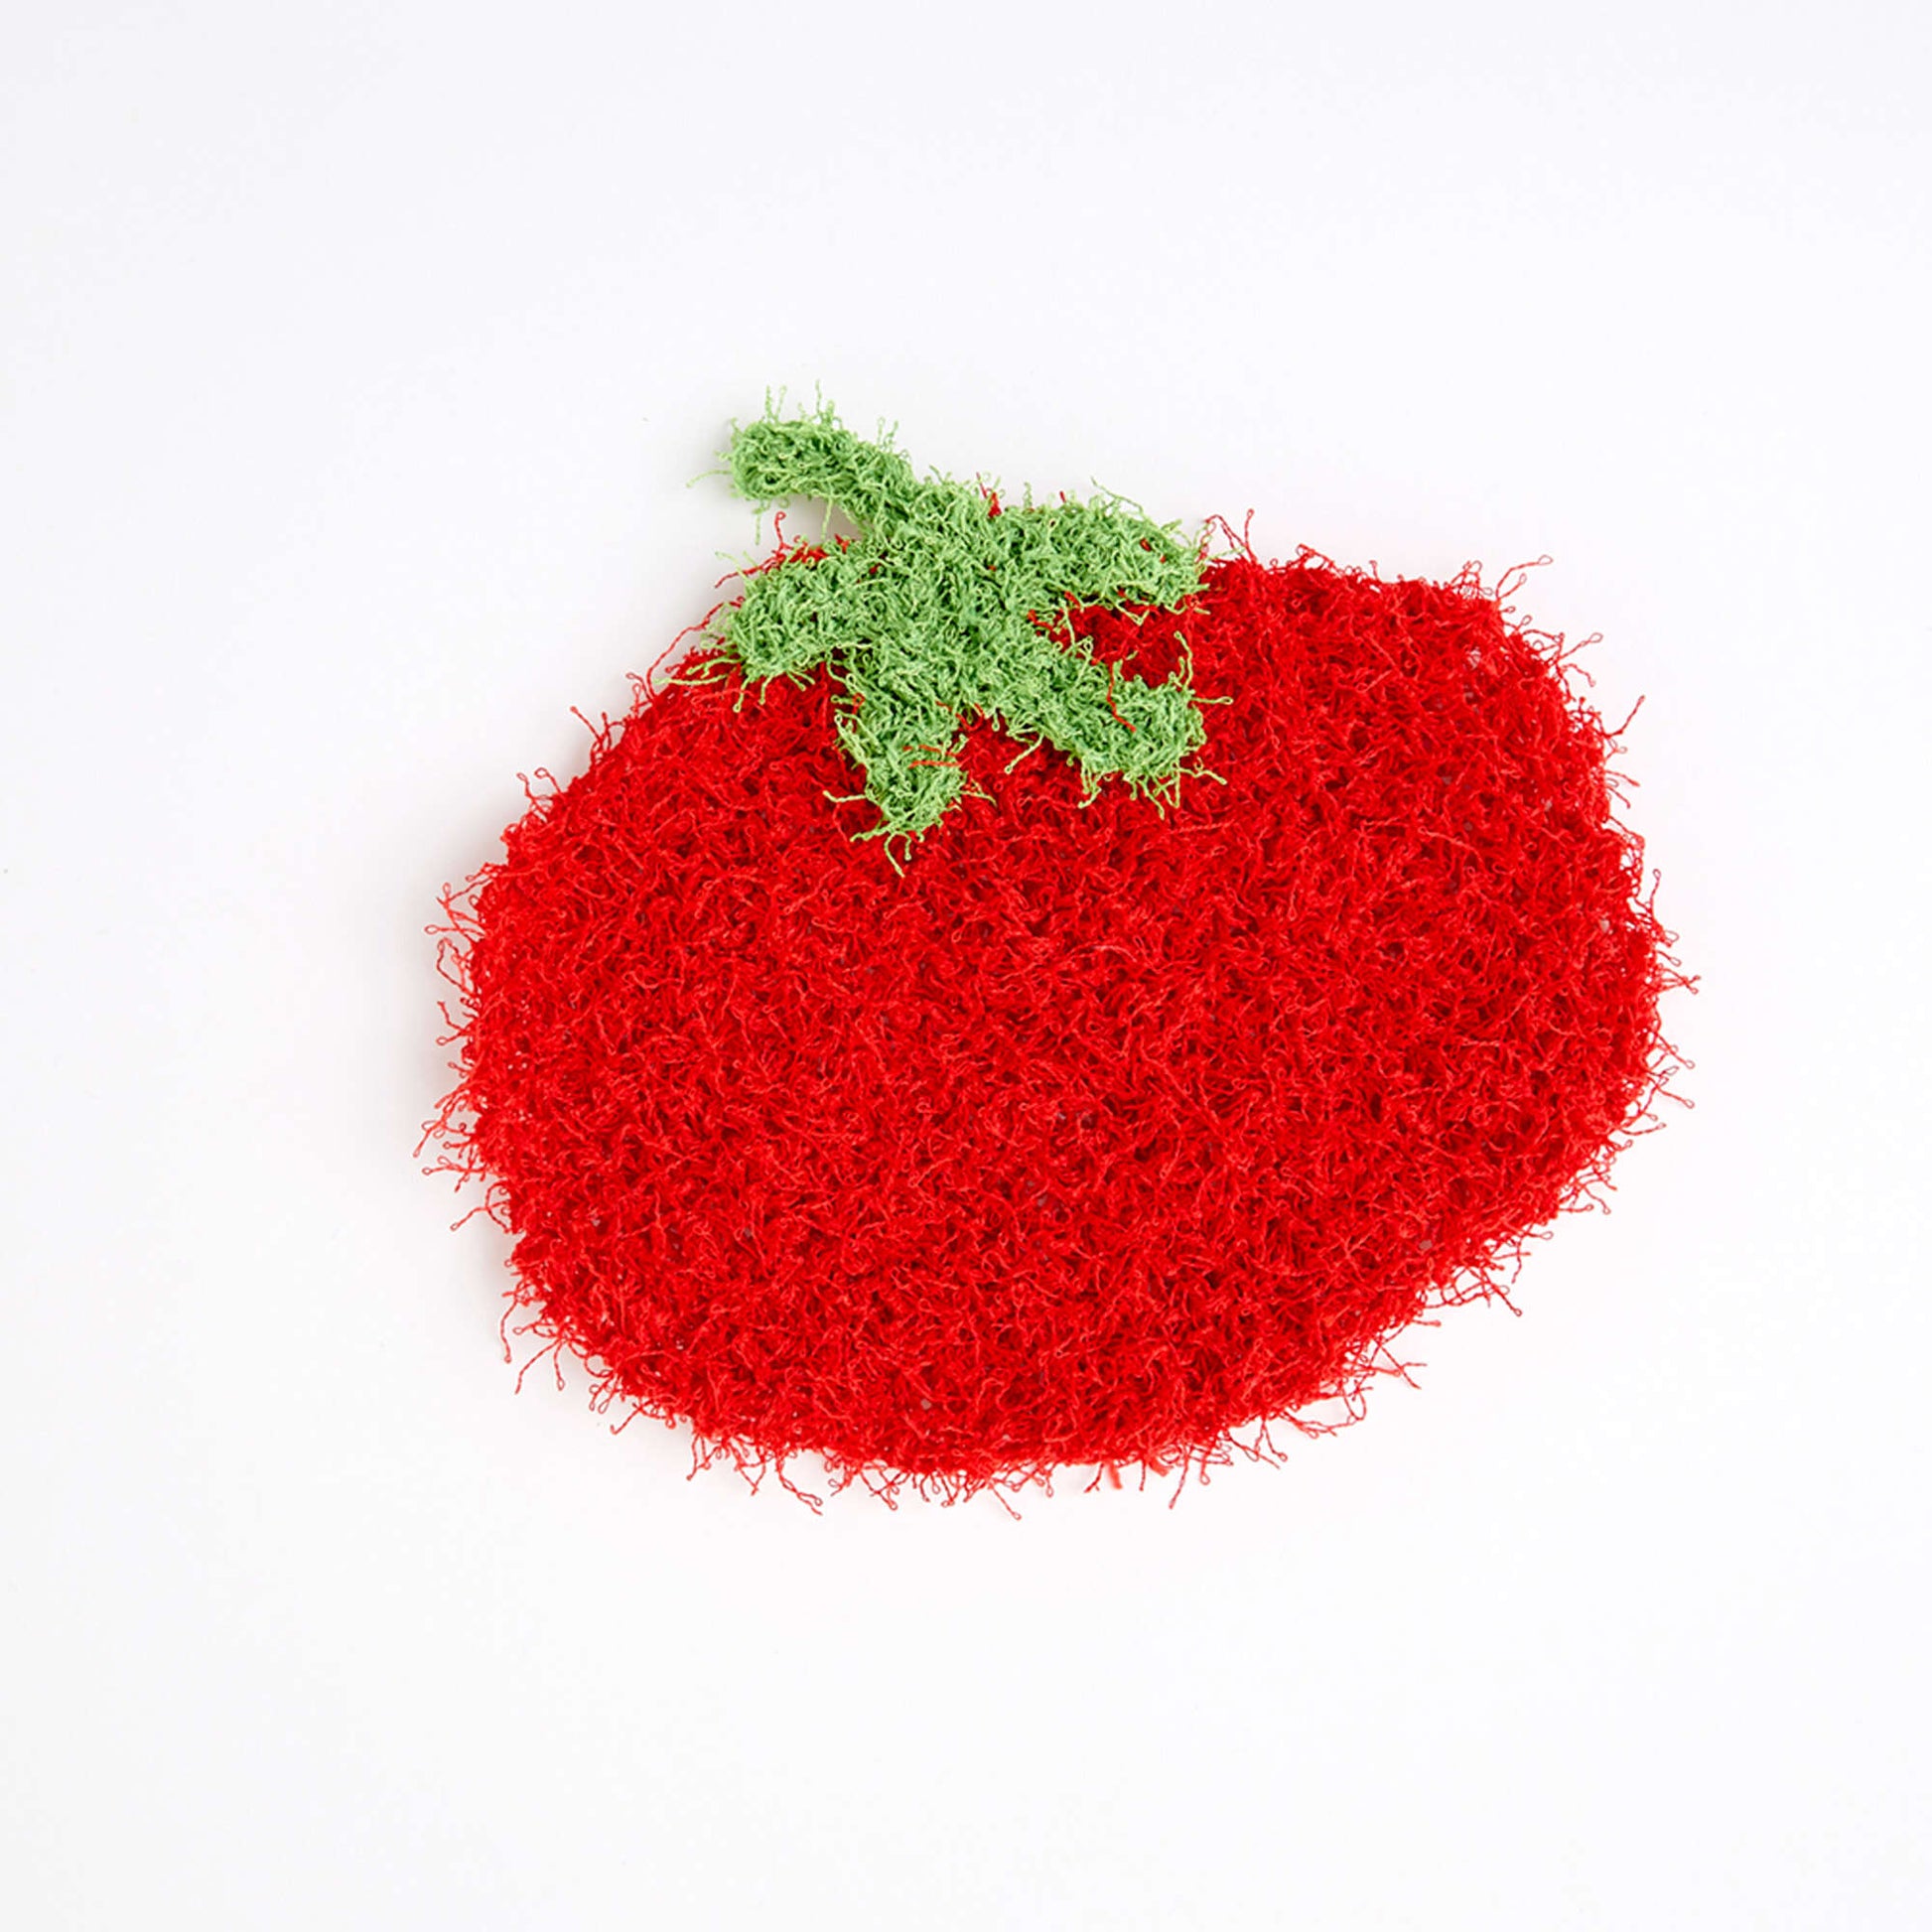 Free Red Heart Tomato Scrubby Knit Pattern